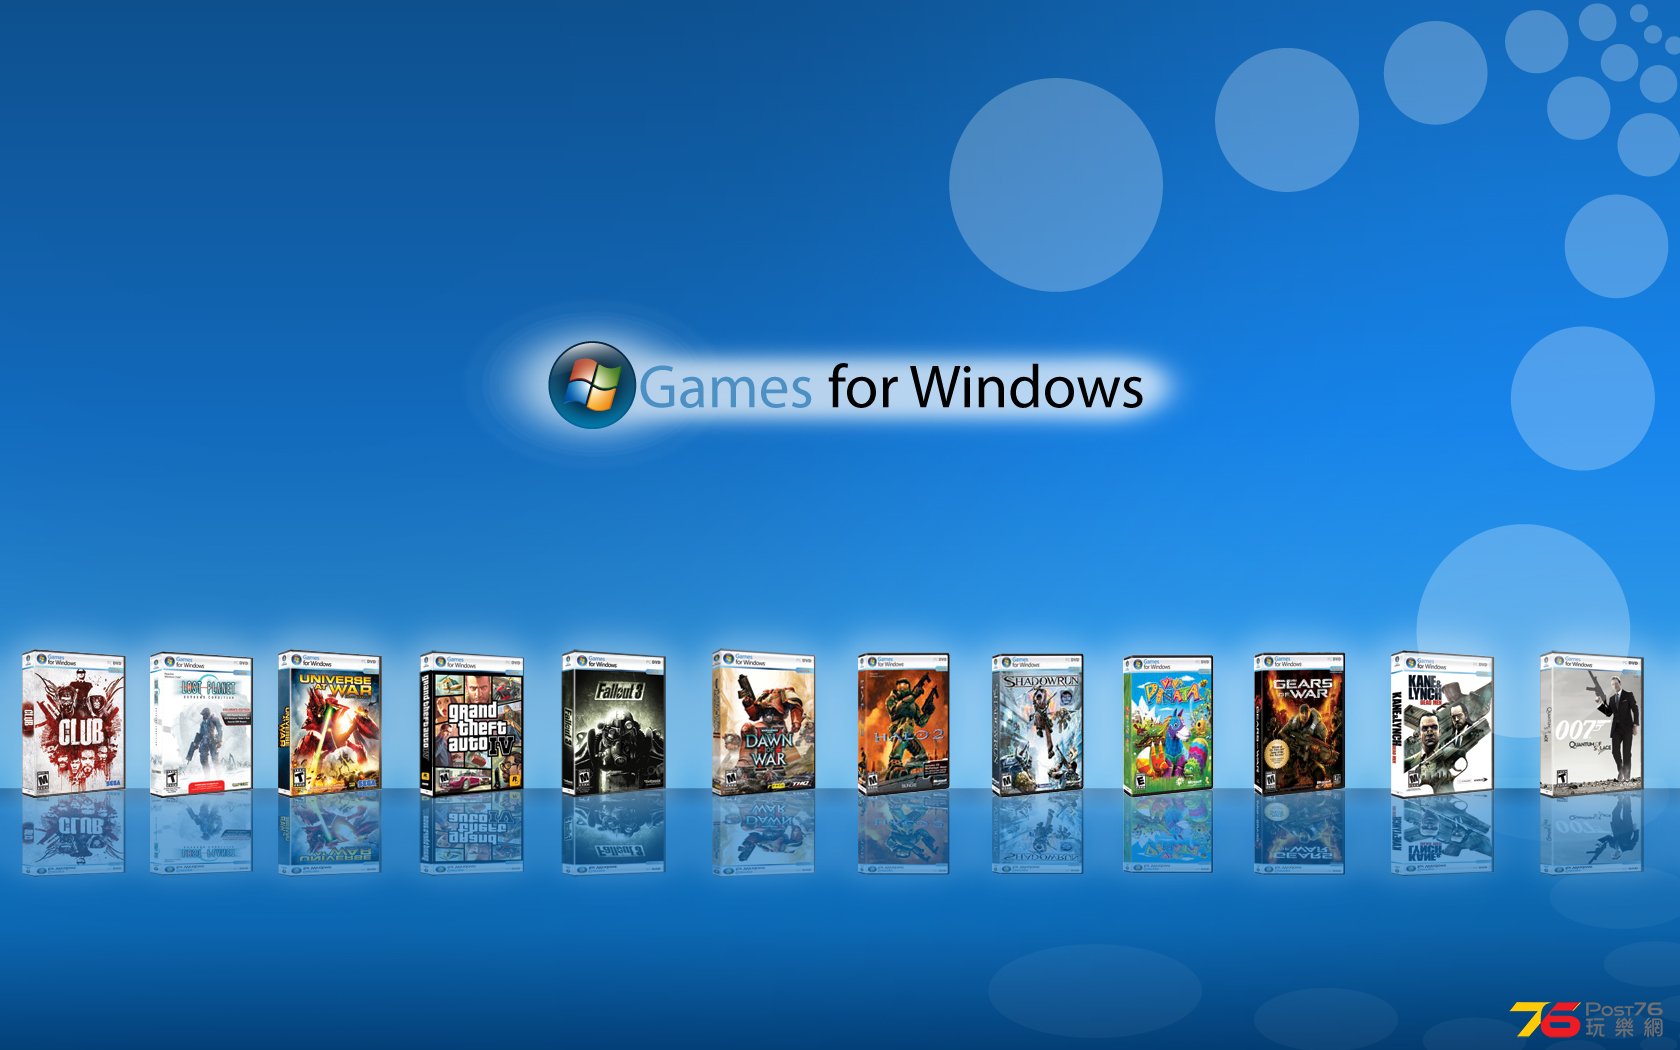 Games_for_Windows_Wallpaper_3_by_TheWax.jpg